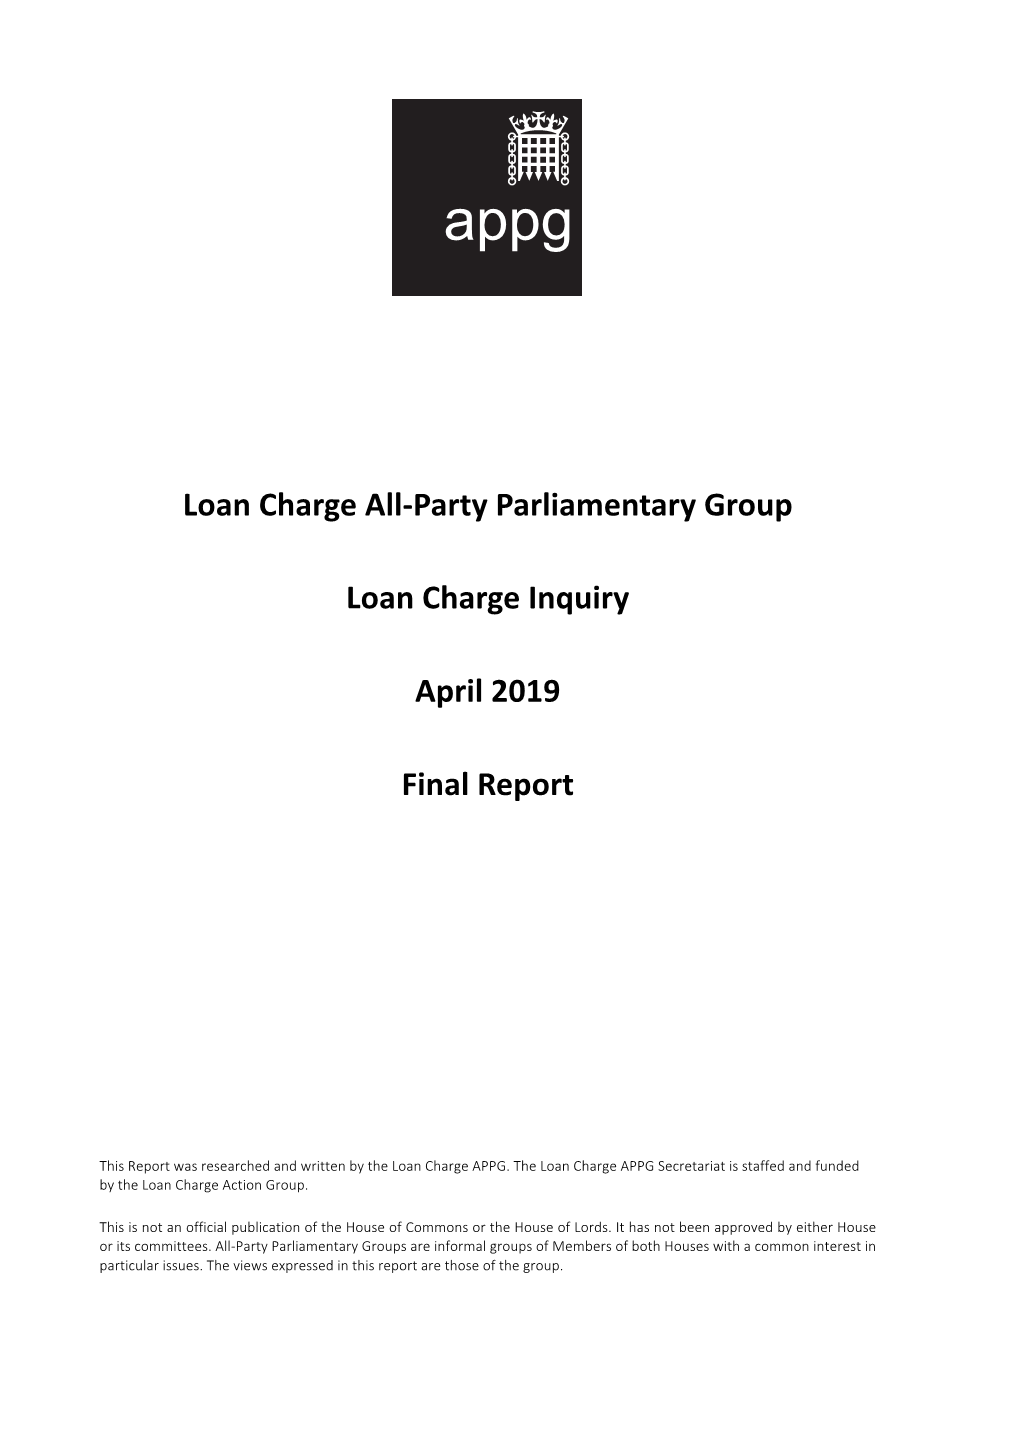 Loan Charge All-Party Parliamentary Group Loan Charge Inquiry April 2019 Final Report